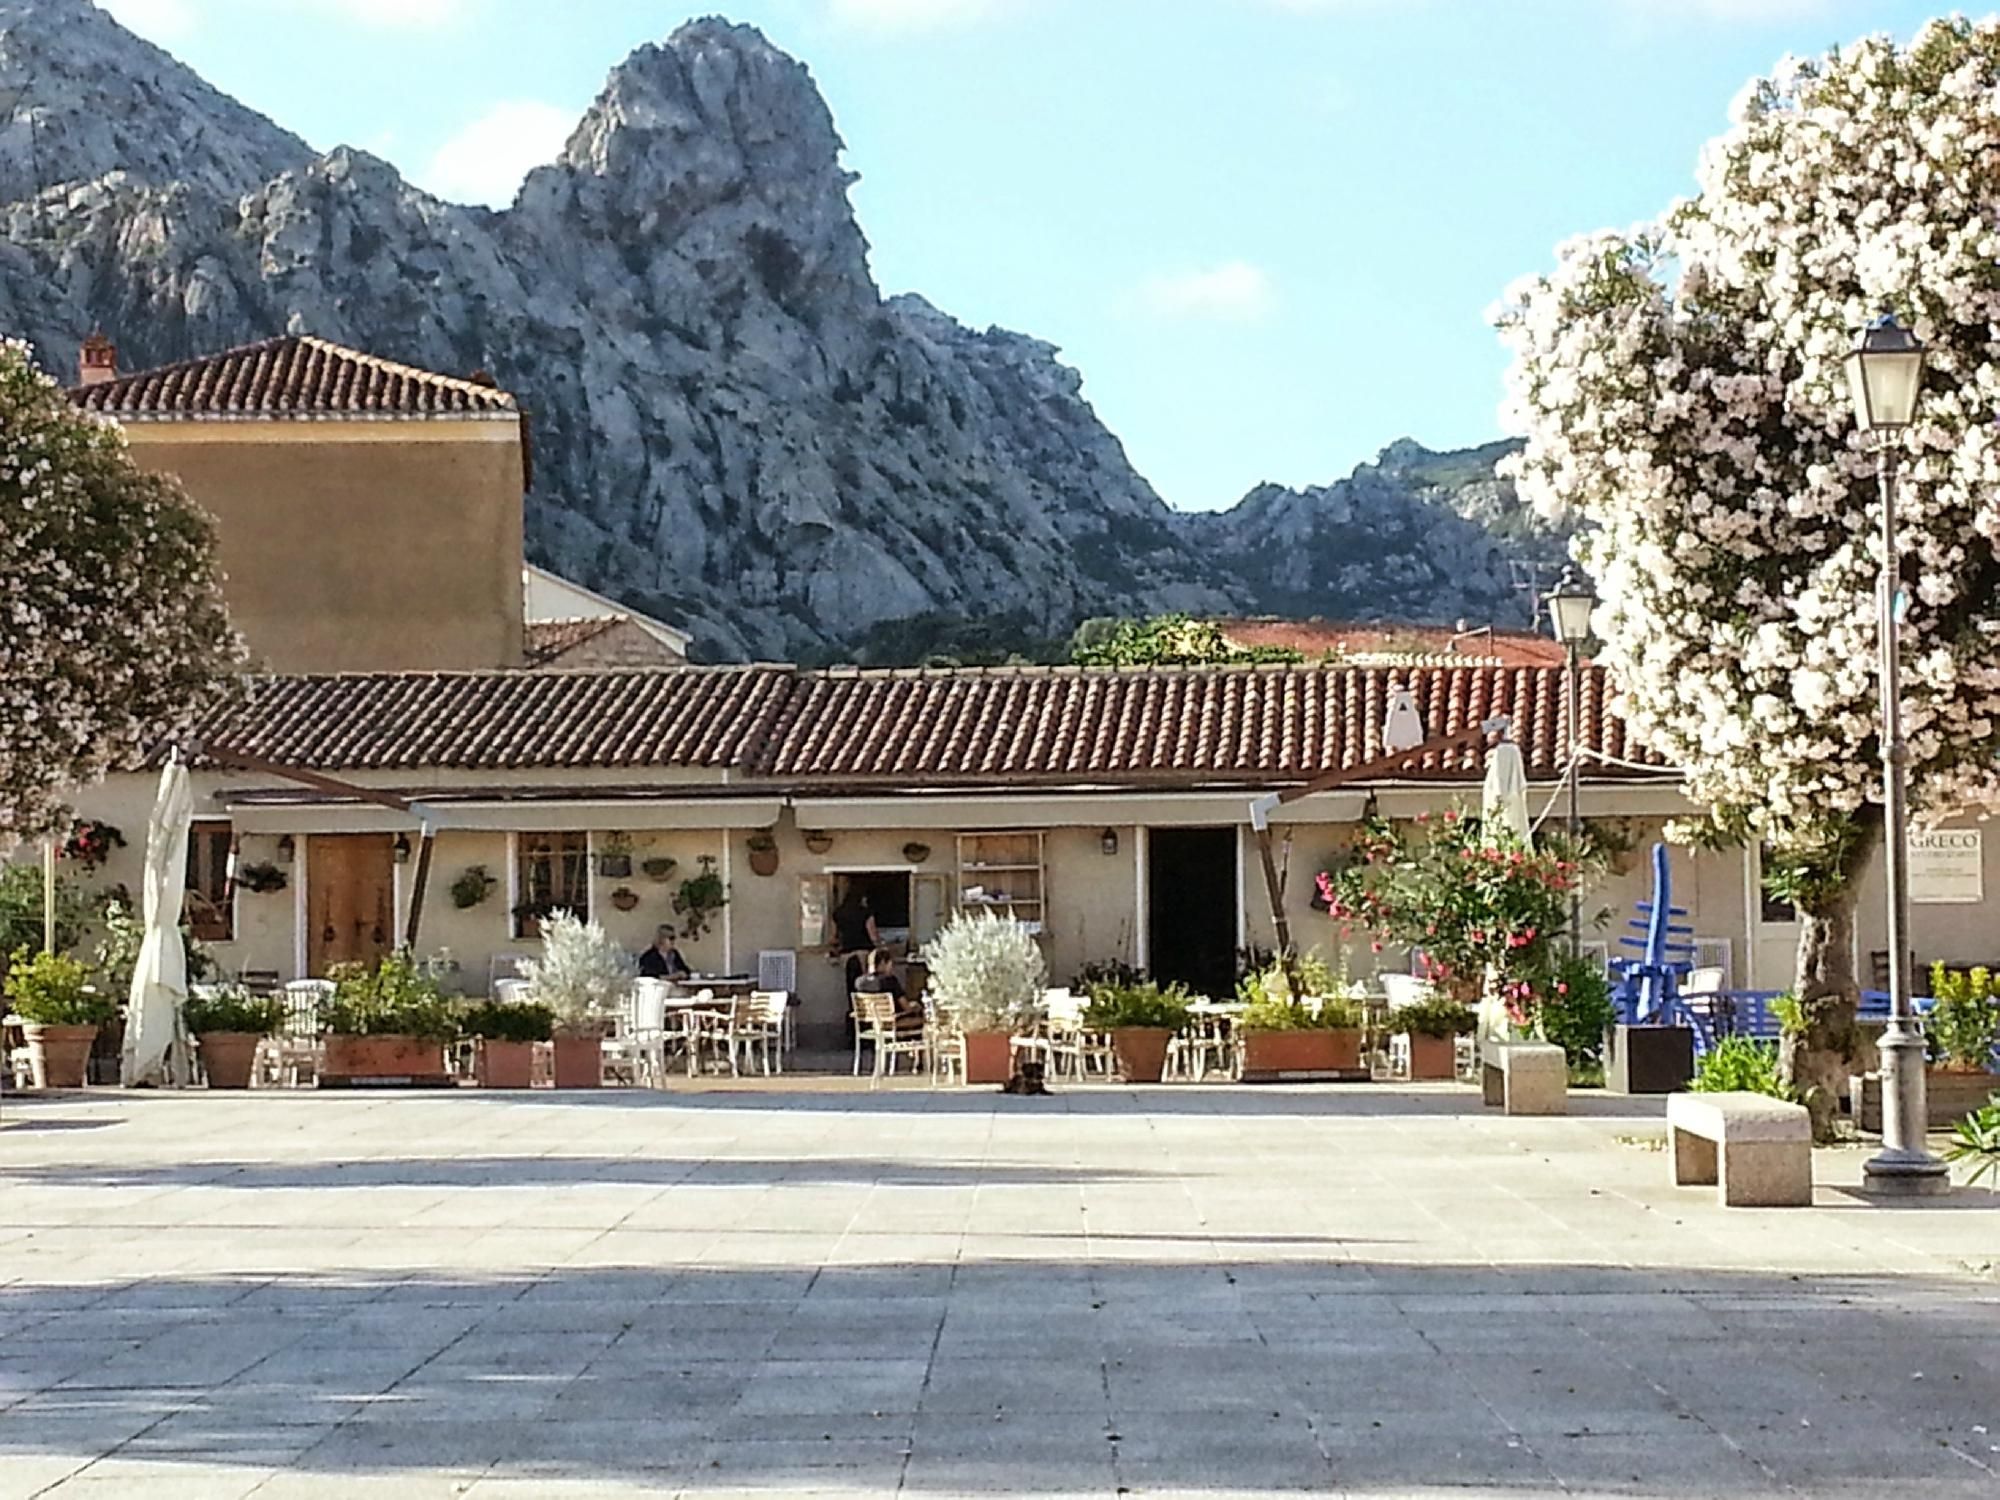 San Pantaleo: Discovering The Village and The Market